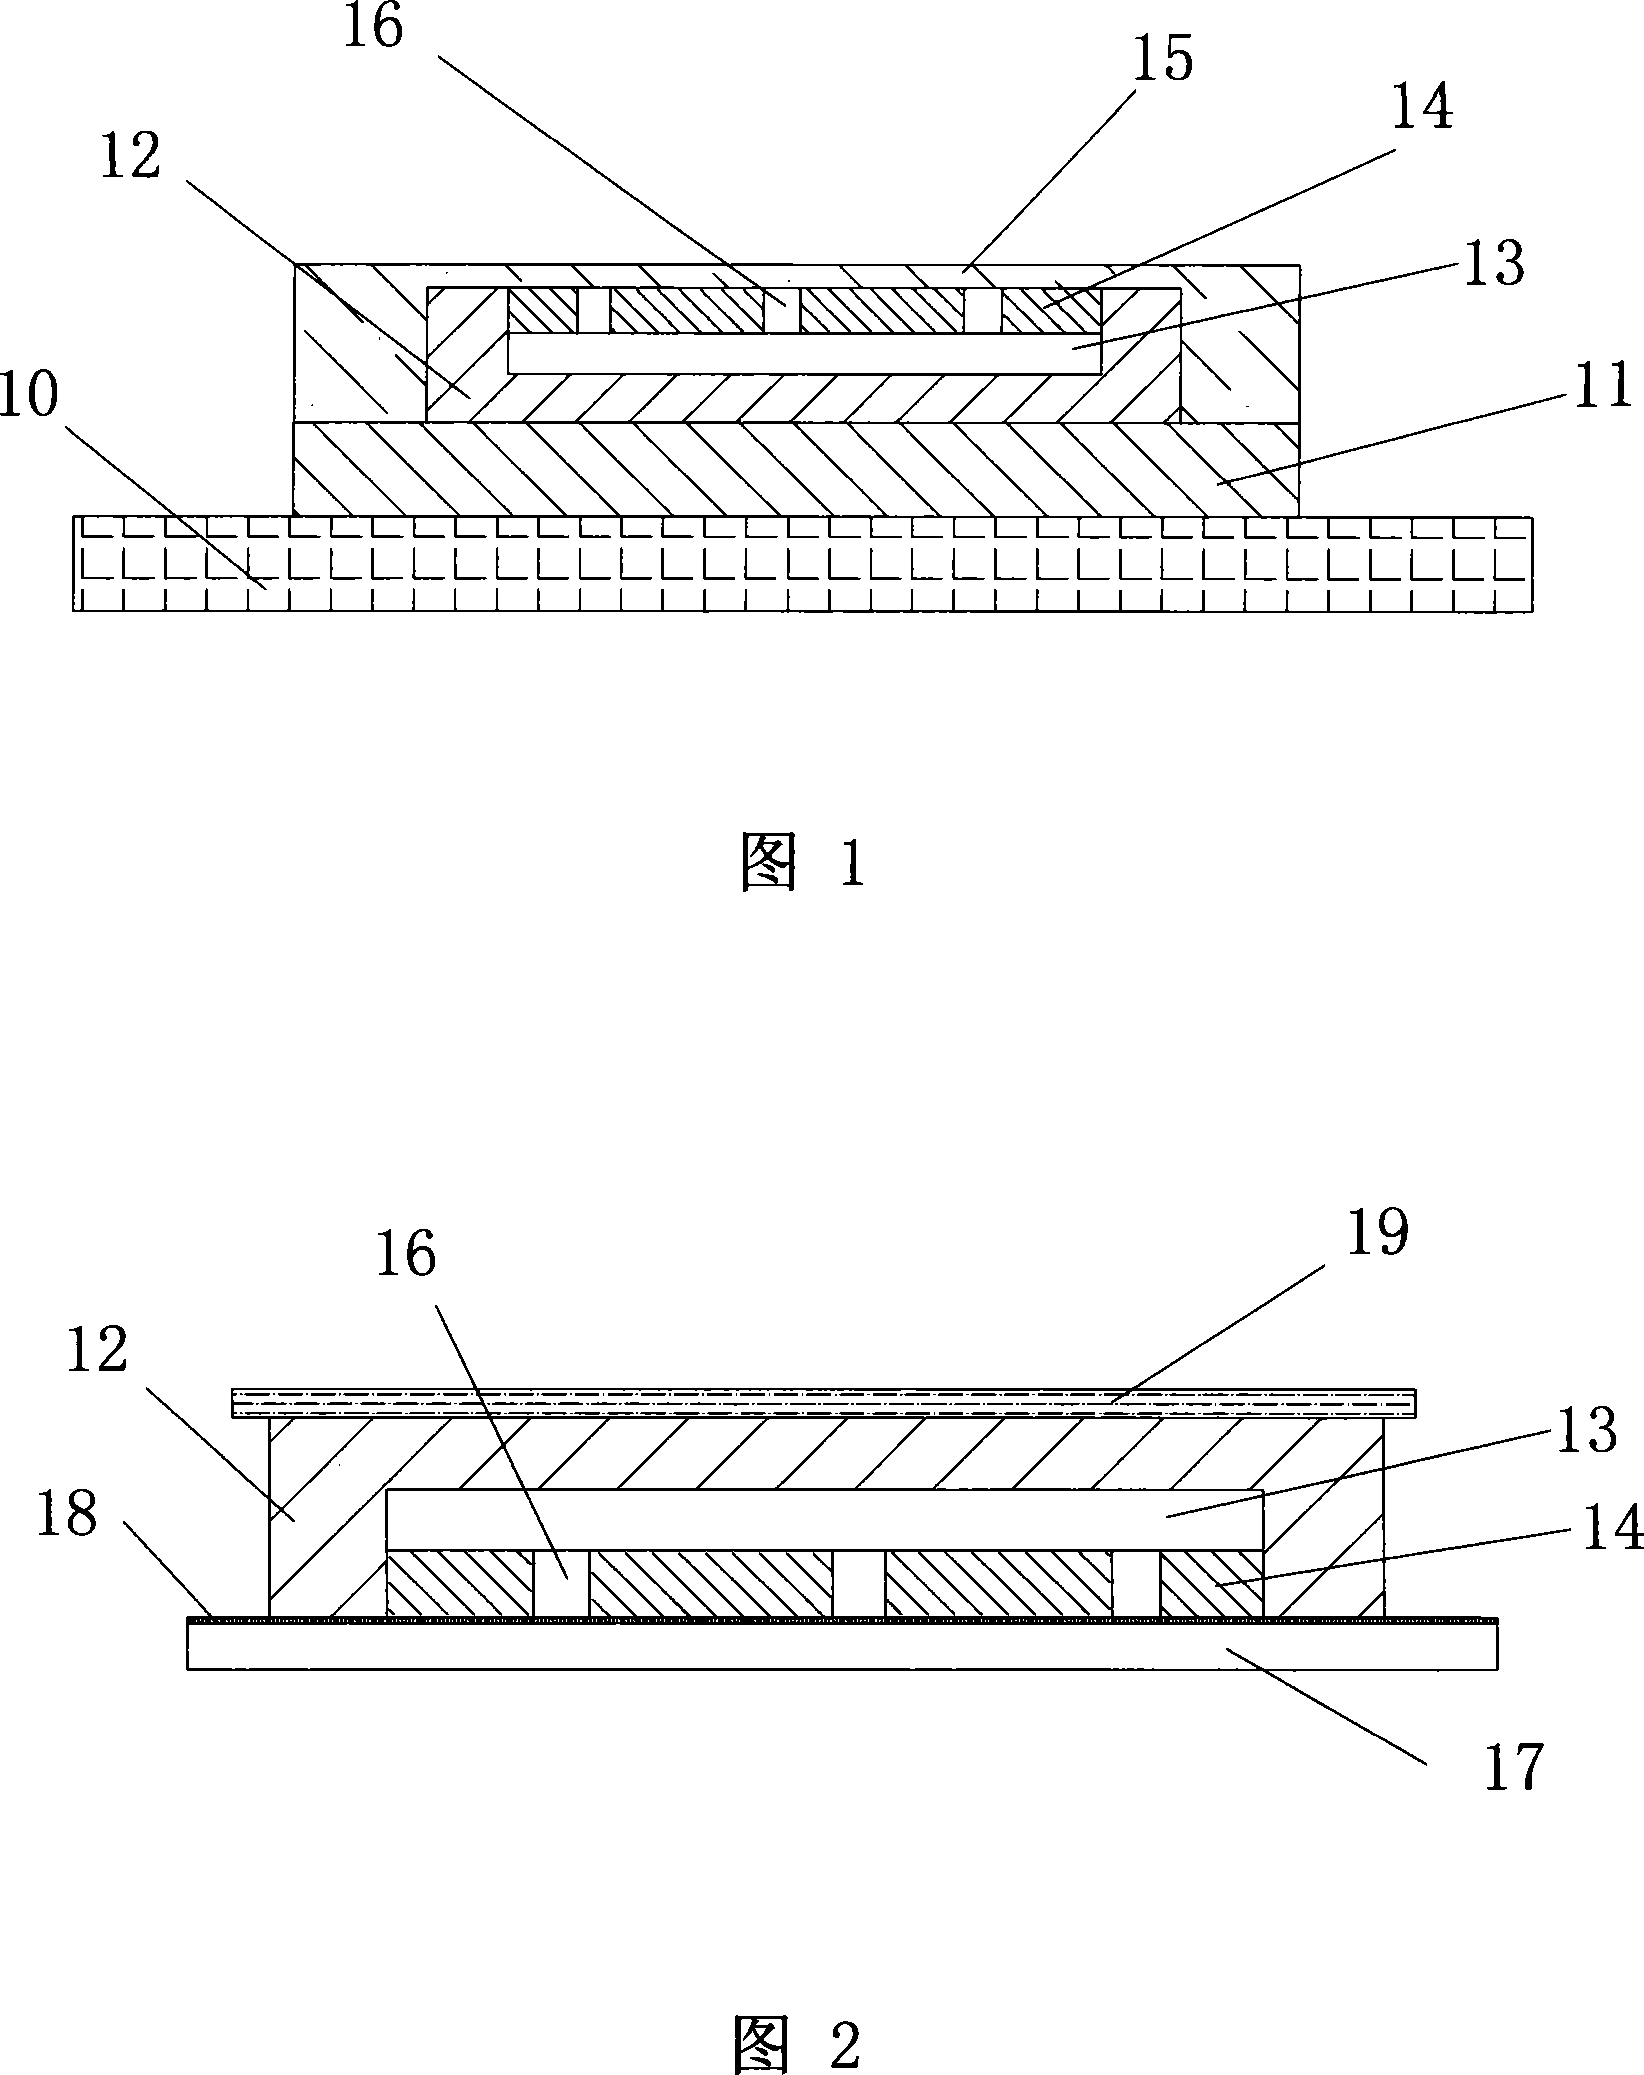 Home appliance surface part with decoration pattern and method for forming pattern on board body of this part